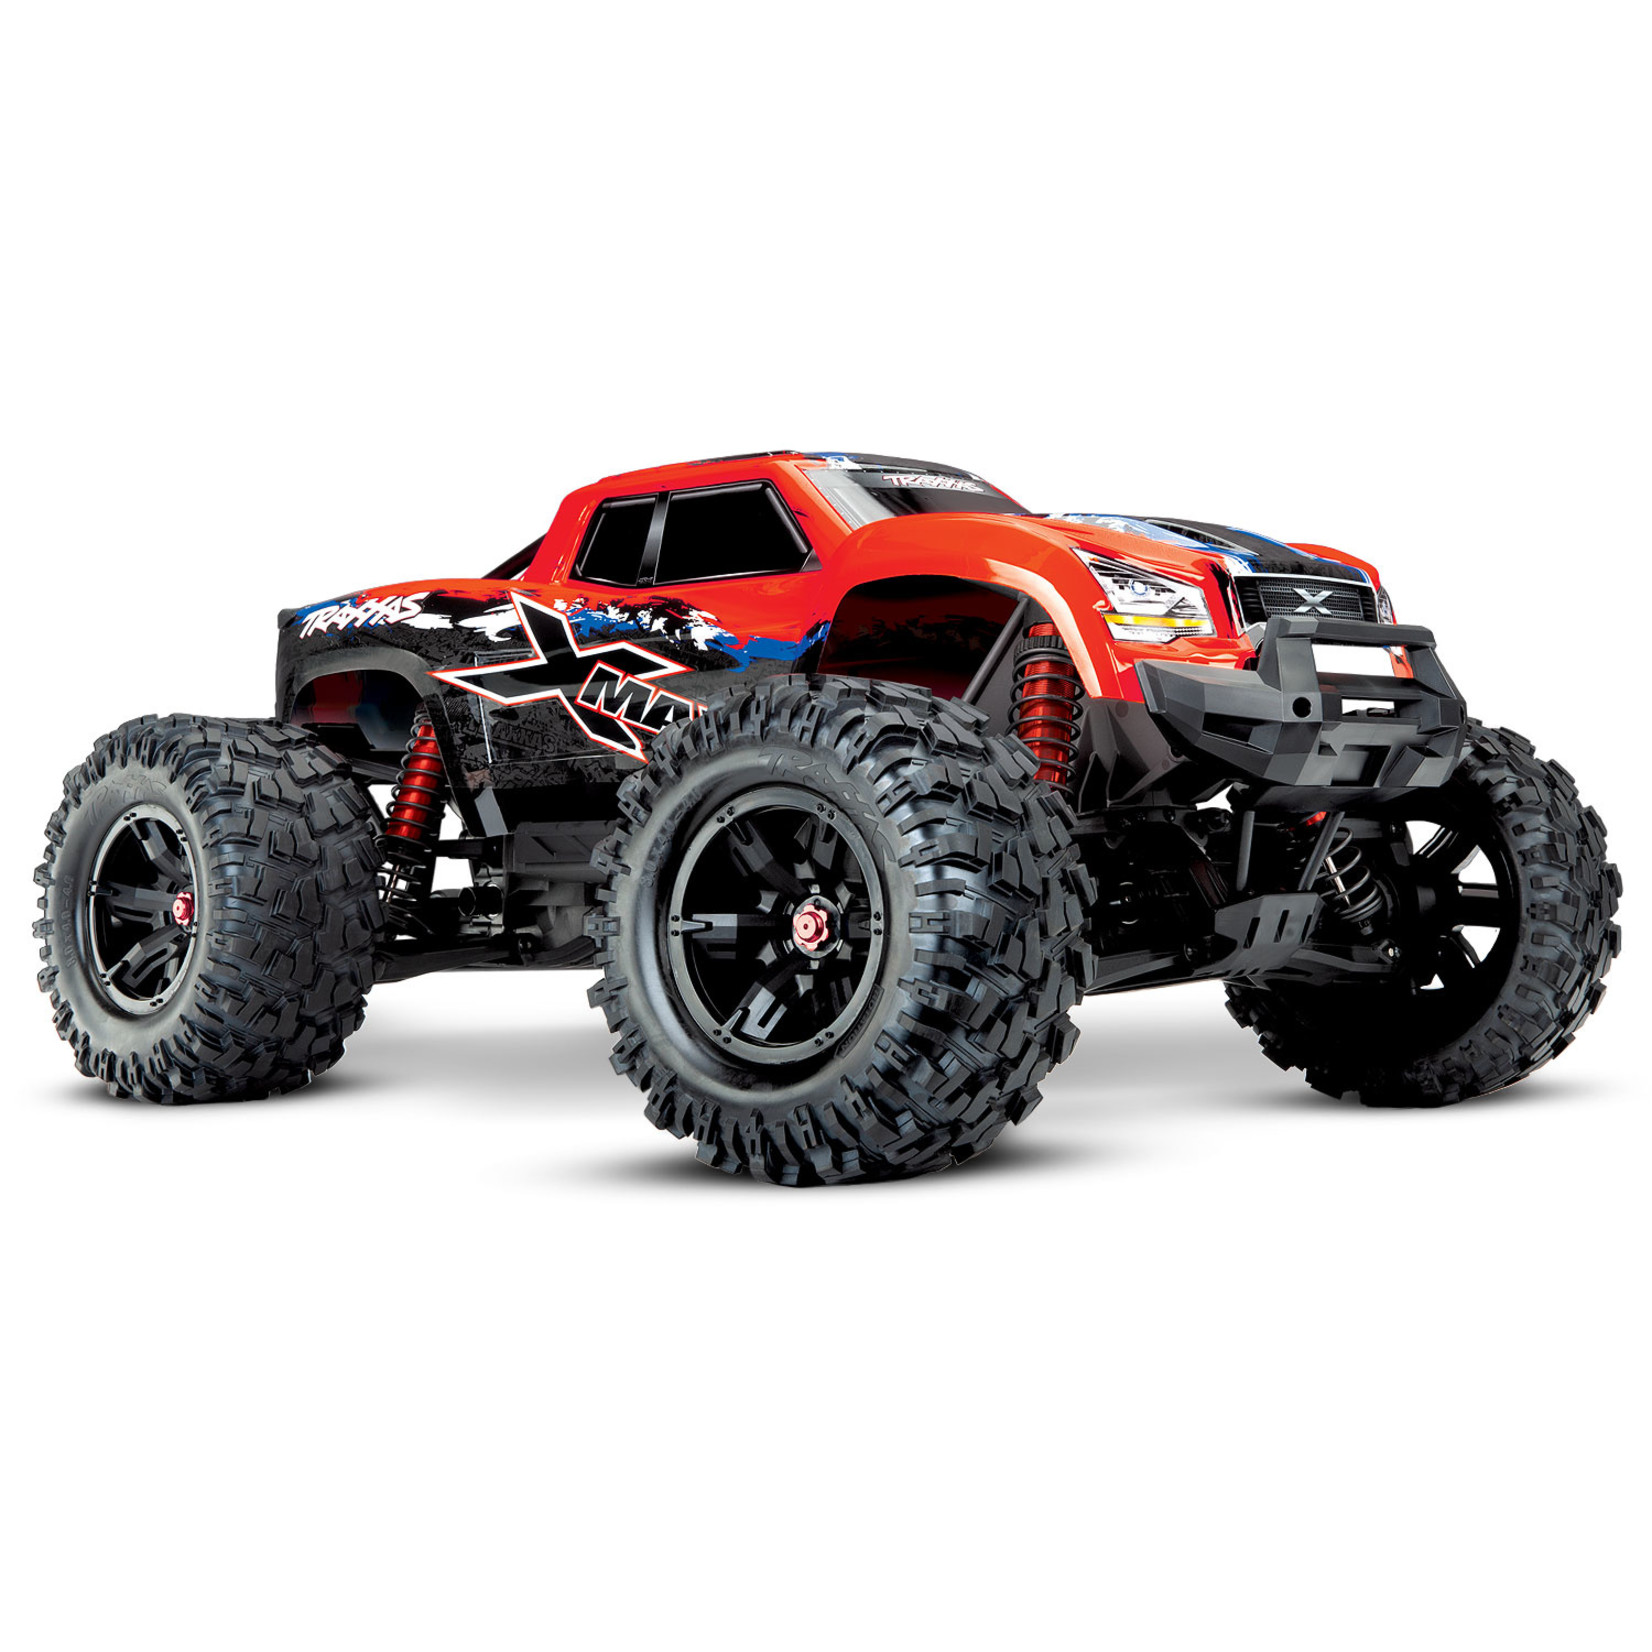 Traxxas X-Maxx: Brushless Electric Monster Truck with Traxxas Stability Management (TSM)